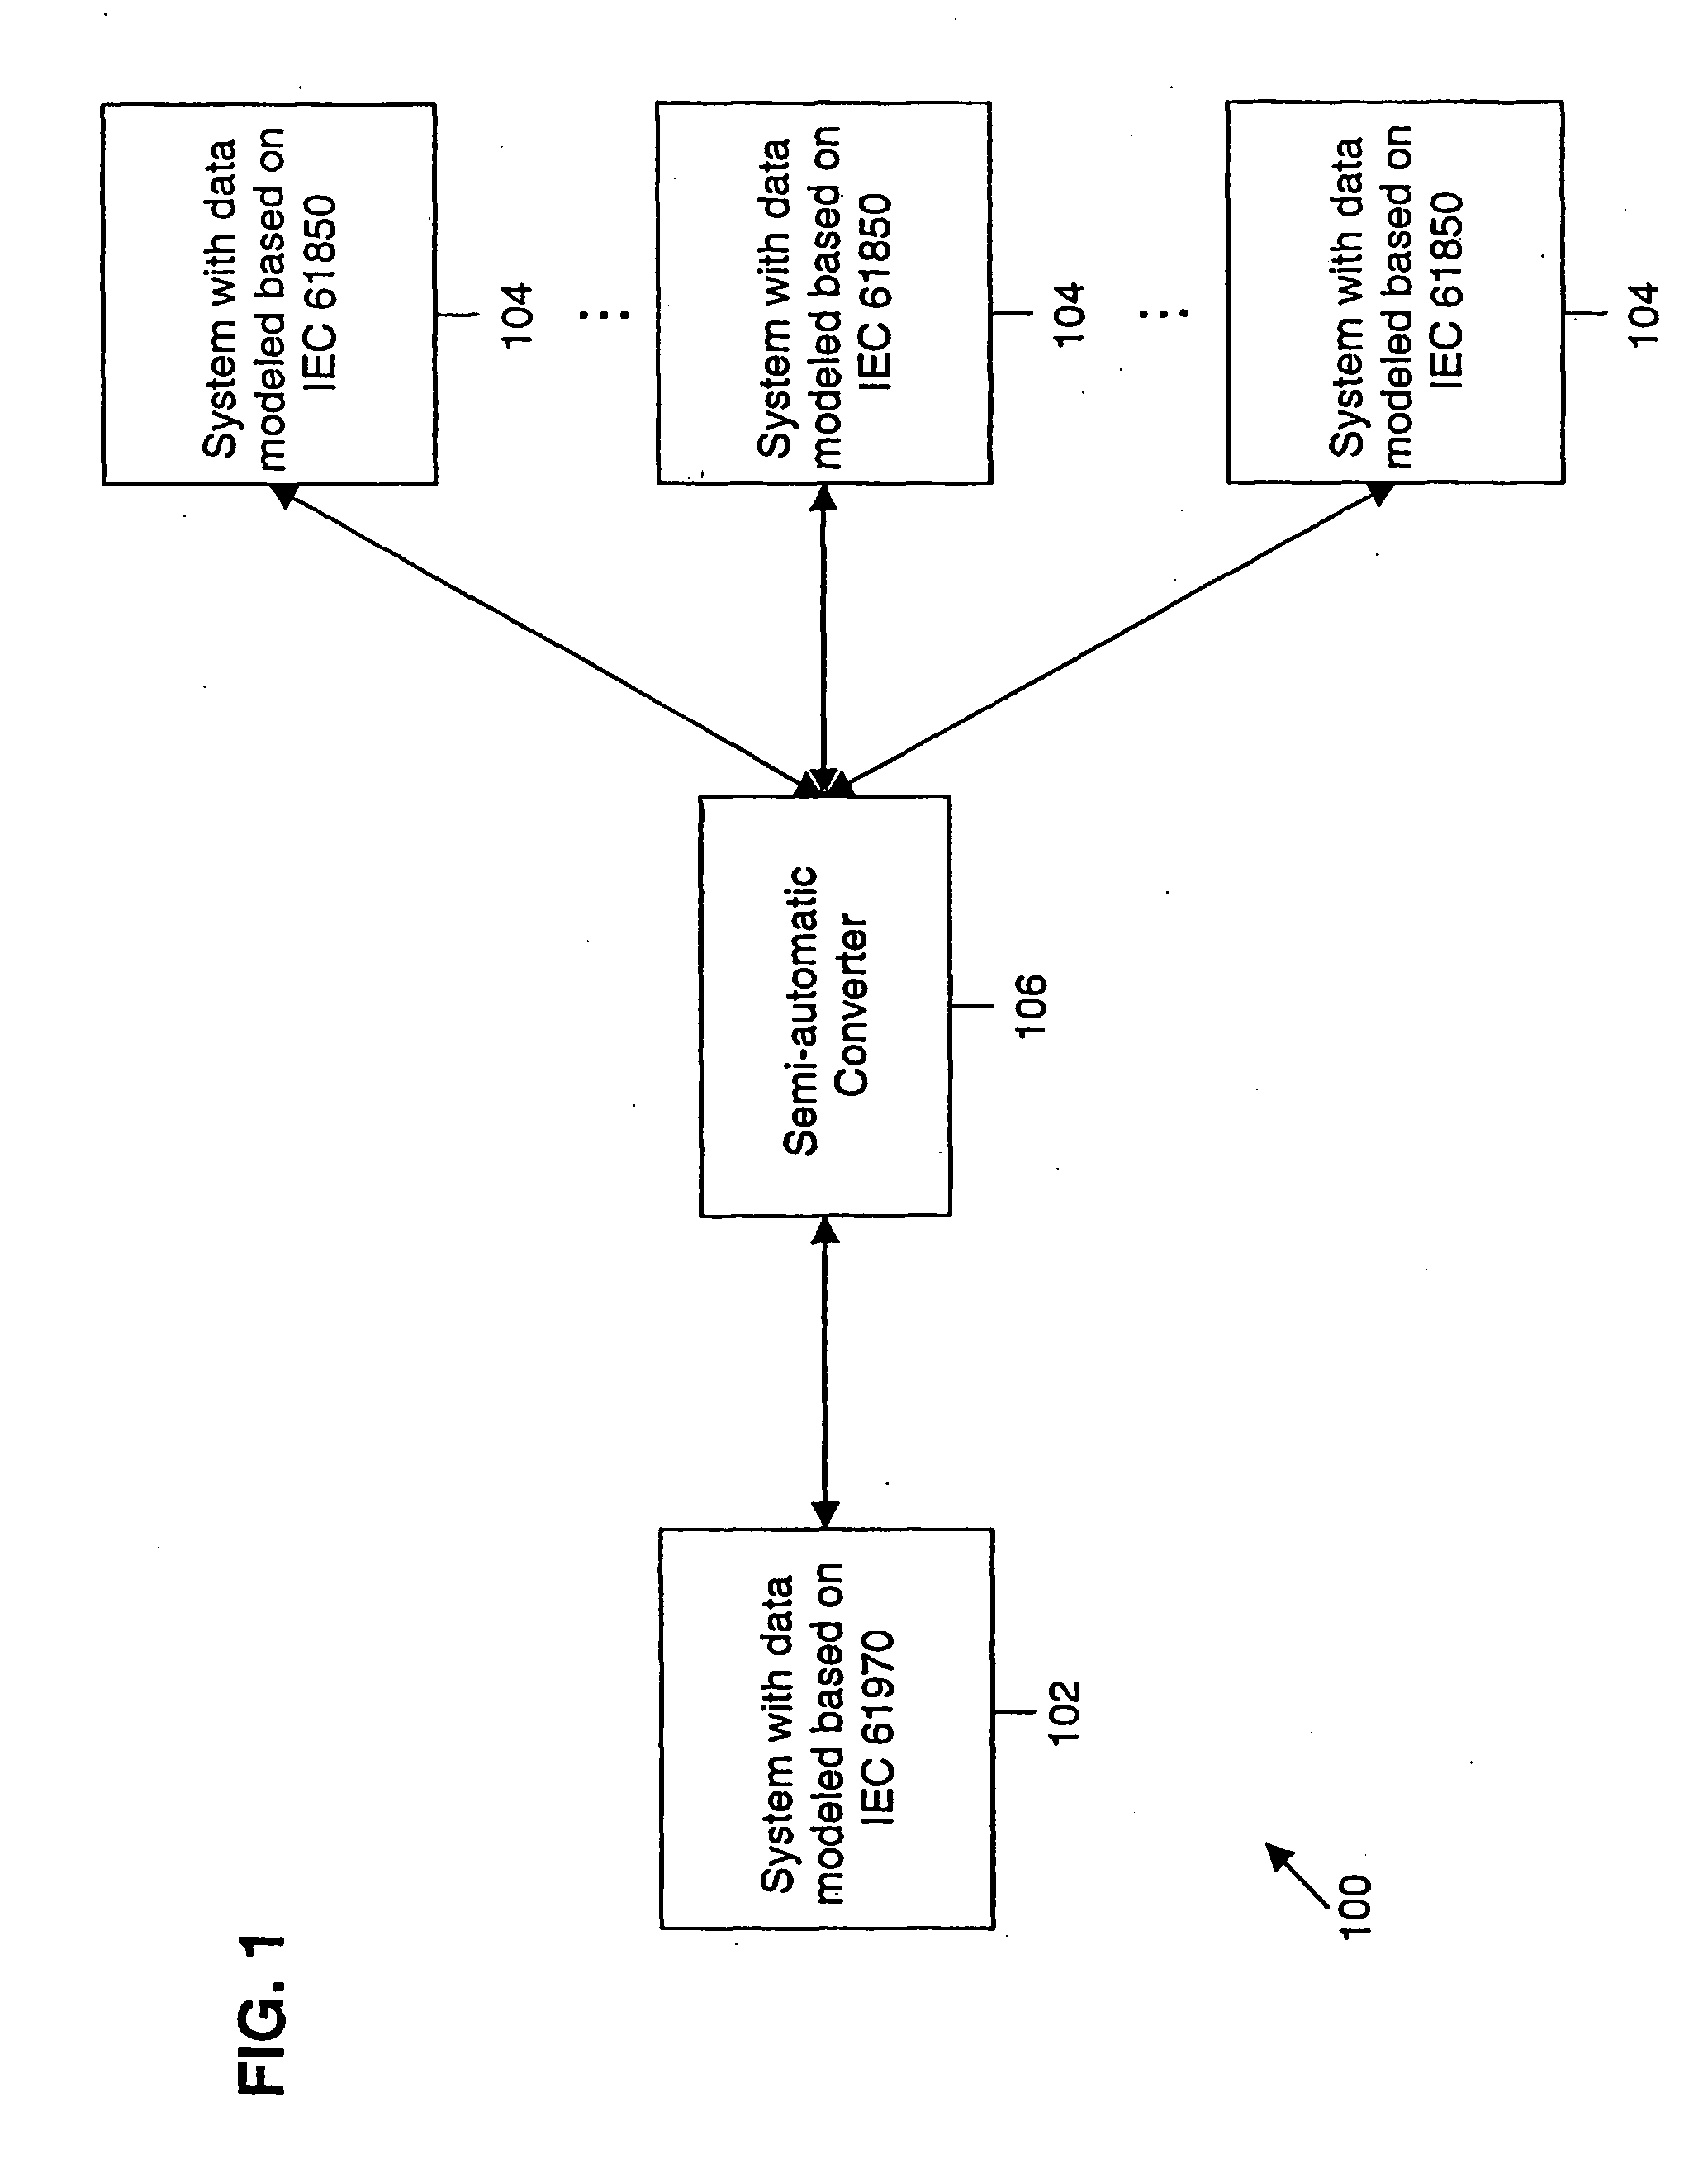 Method and system for bi-directional data conversion between IEC 61970 and IEC 61850